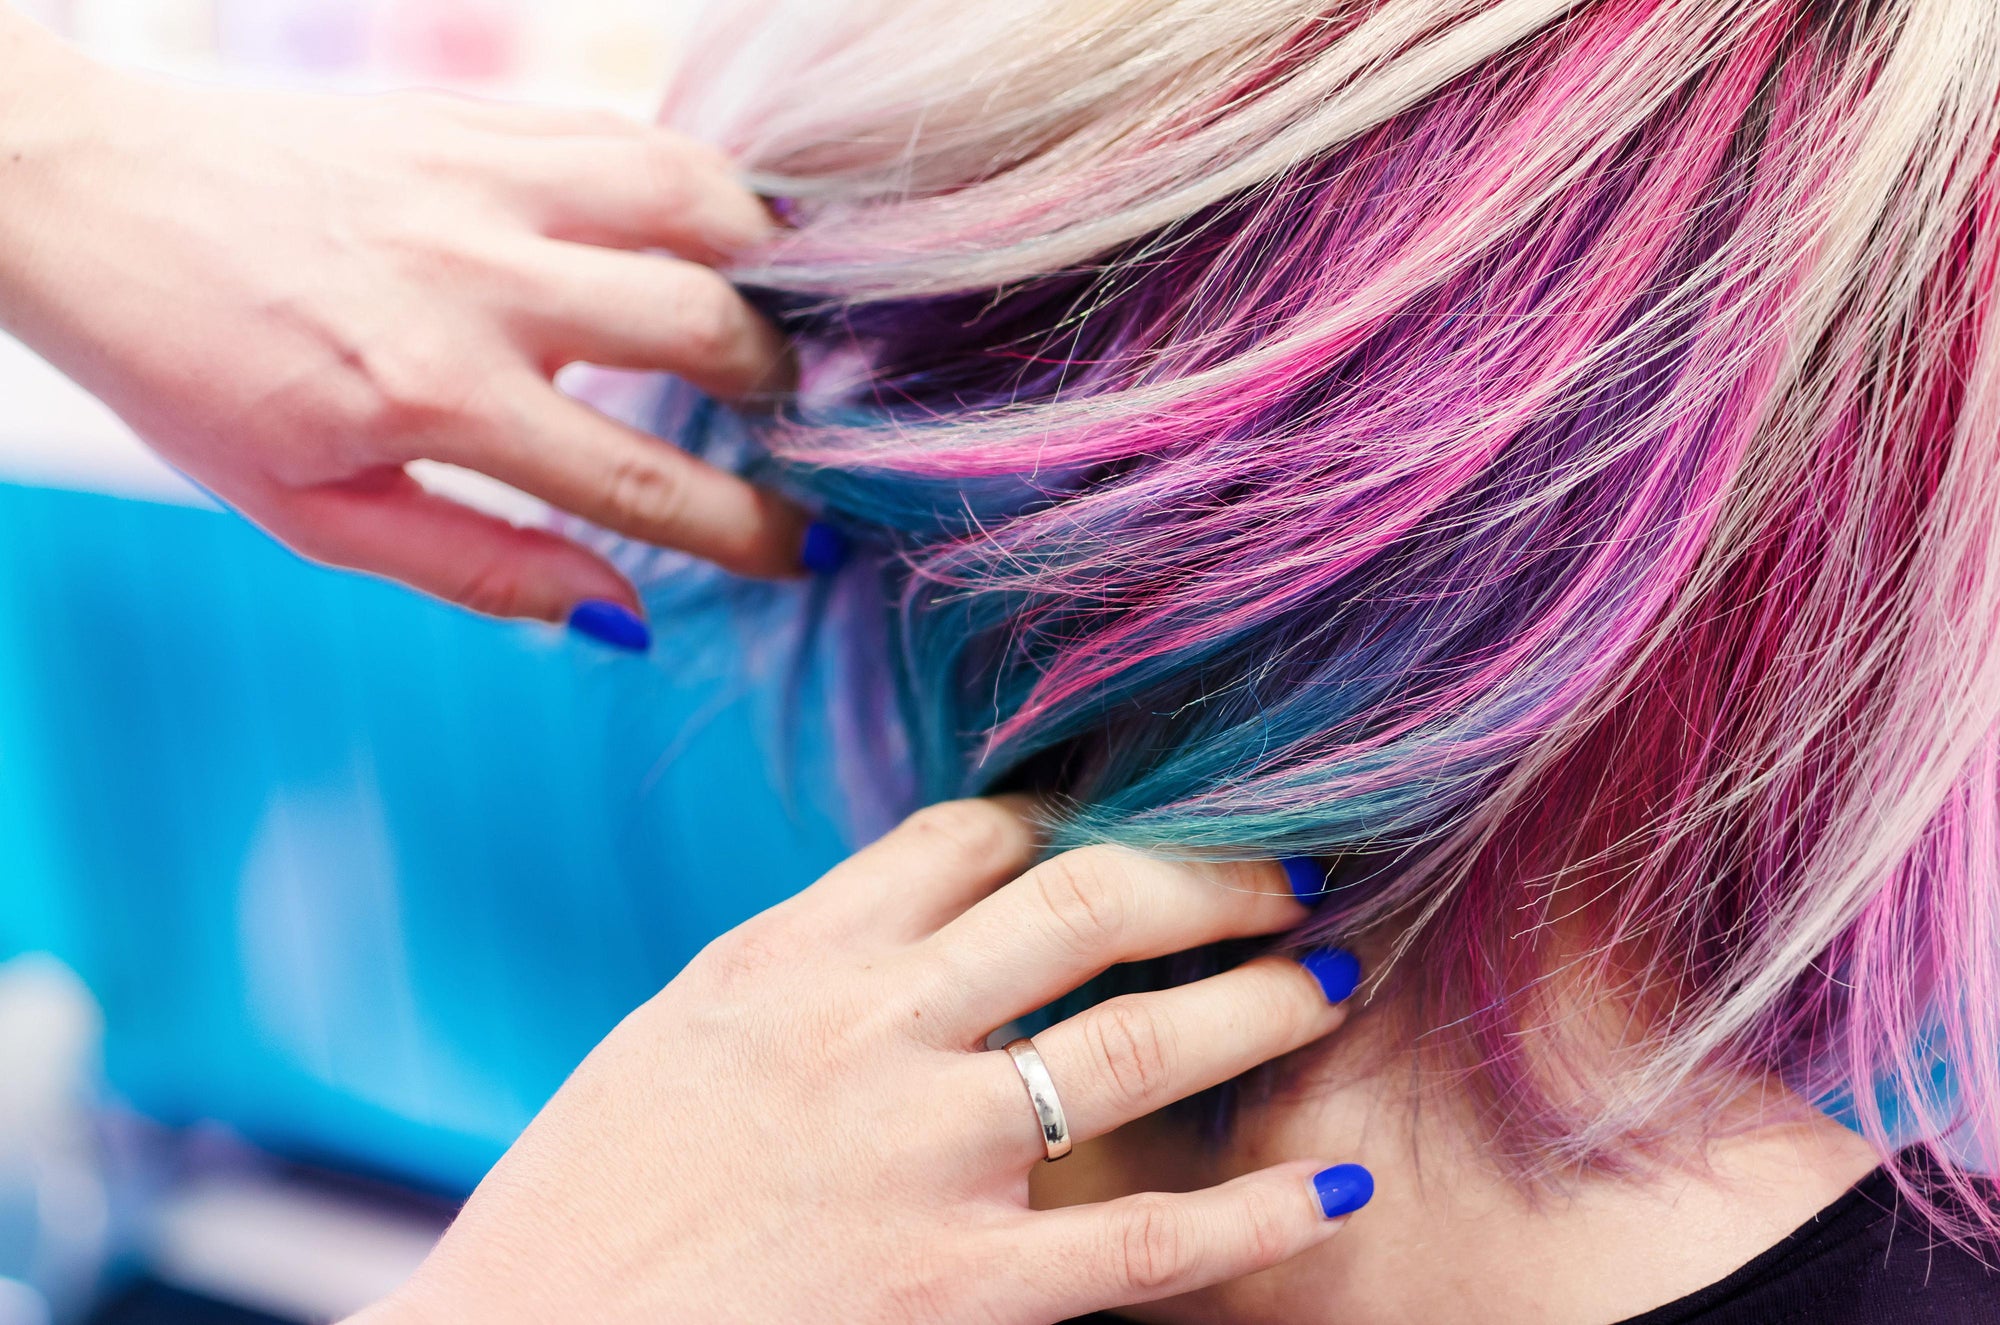 Bleach Please! The Best Way to Add Some Color to Your Hair With A Few Simple Steps